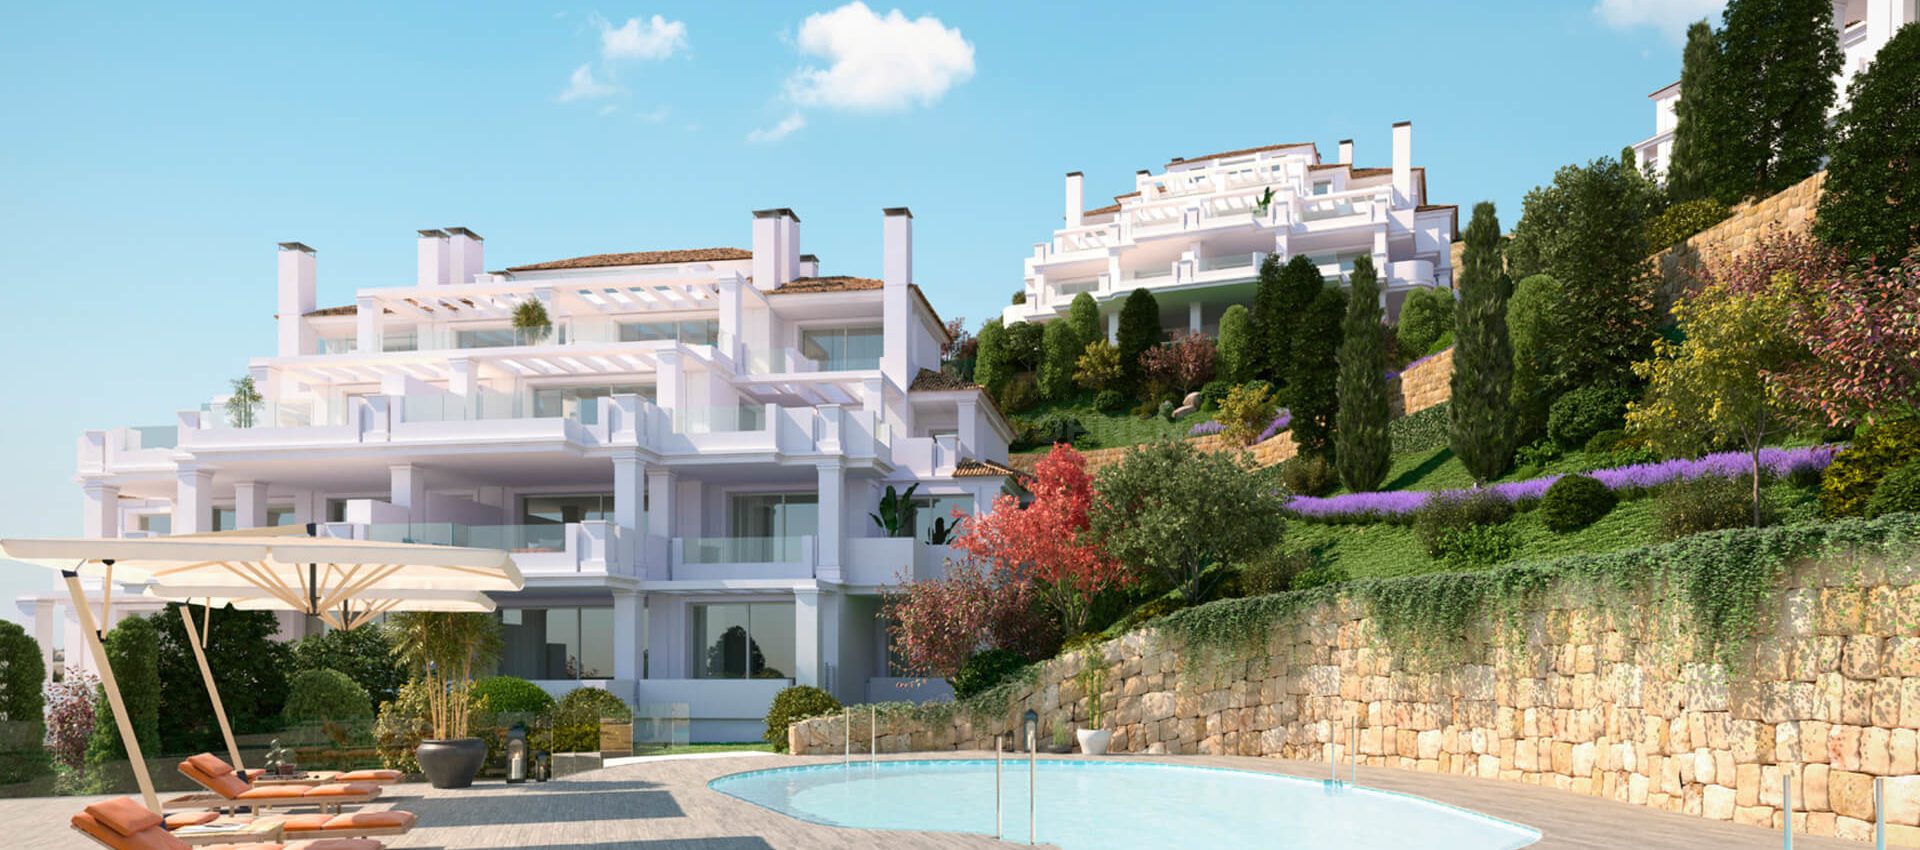 Apartments and penthouses with fabulous views to the Mediterranean Sea